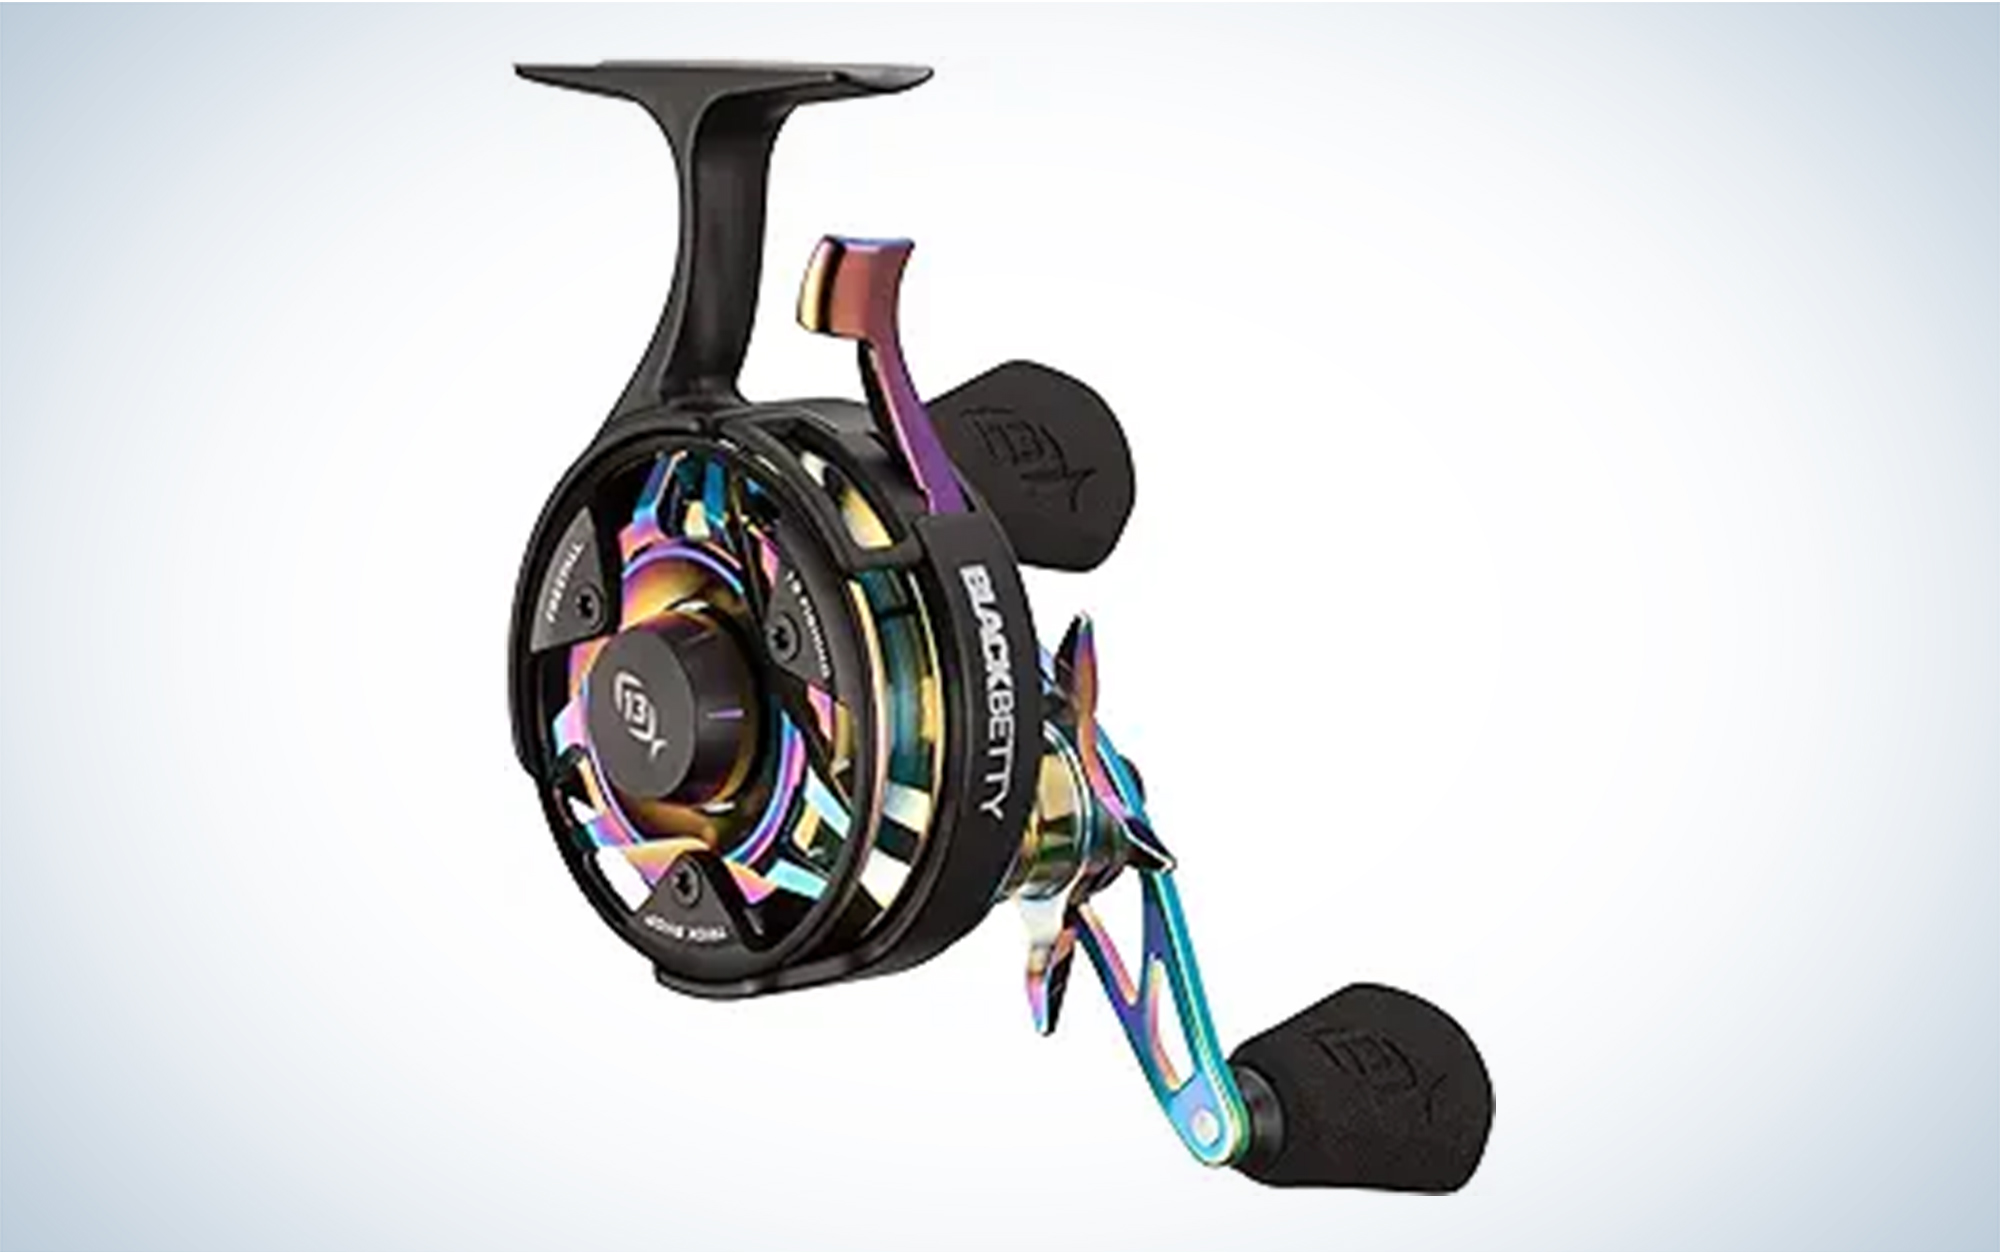 13 Fishing Freefall Carbon Trick Shop Edition